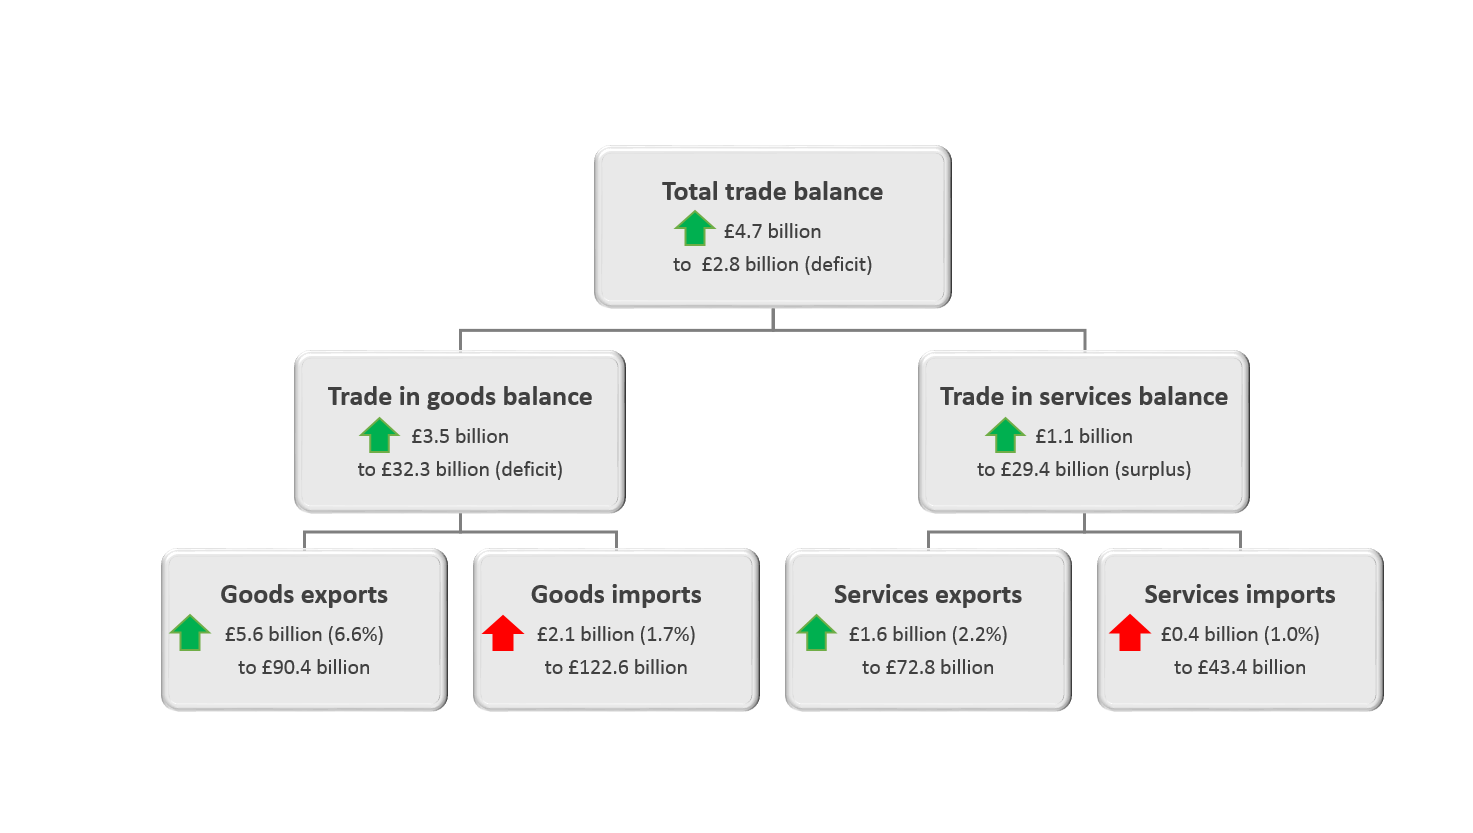 The total trade balance has improved by £4.7 billion in the three months to August 2018.